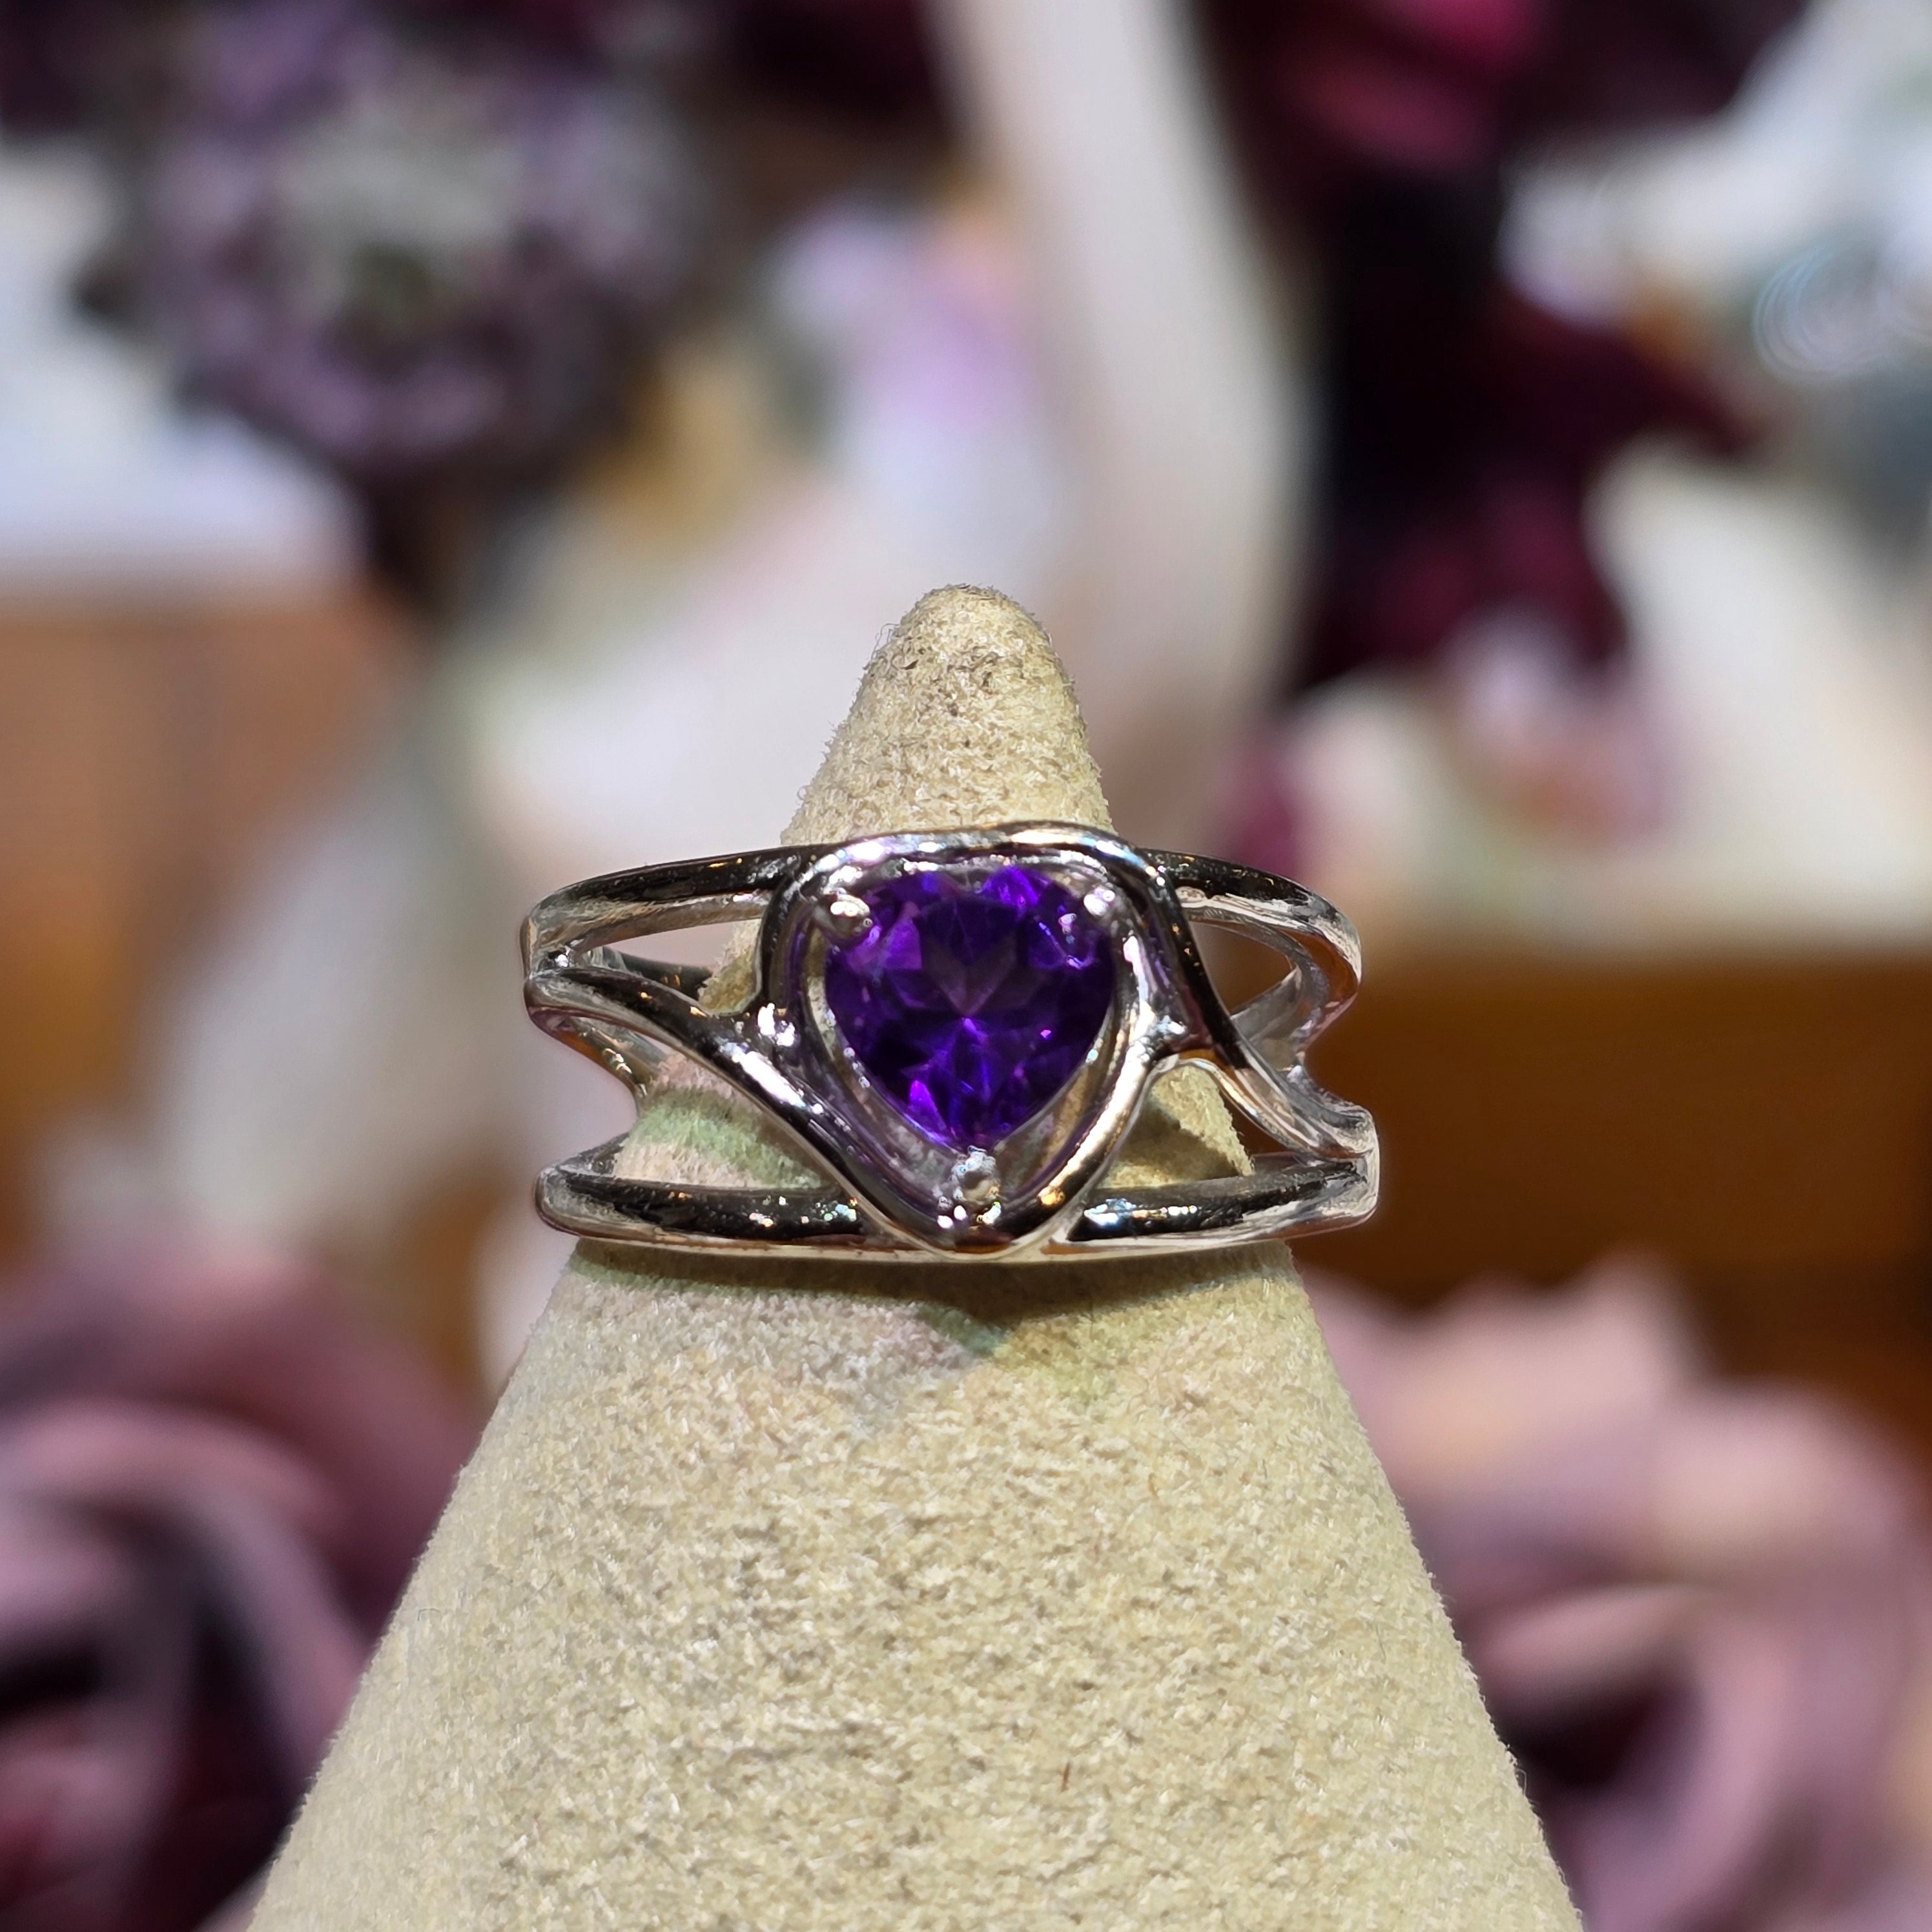 Amethyst Heart Midi Adjustable Finger Cuff Ring .925 Silver for Divine Connection, Intuition and Energy Purification